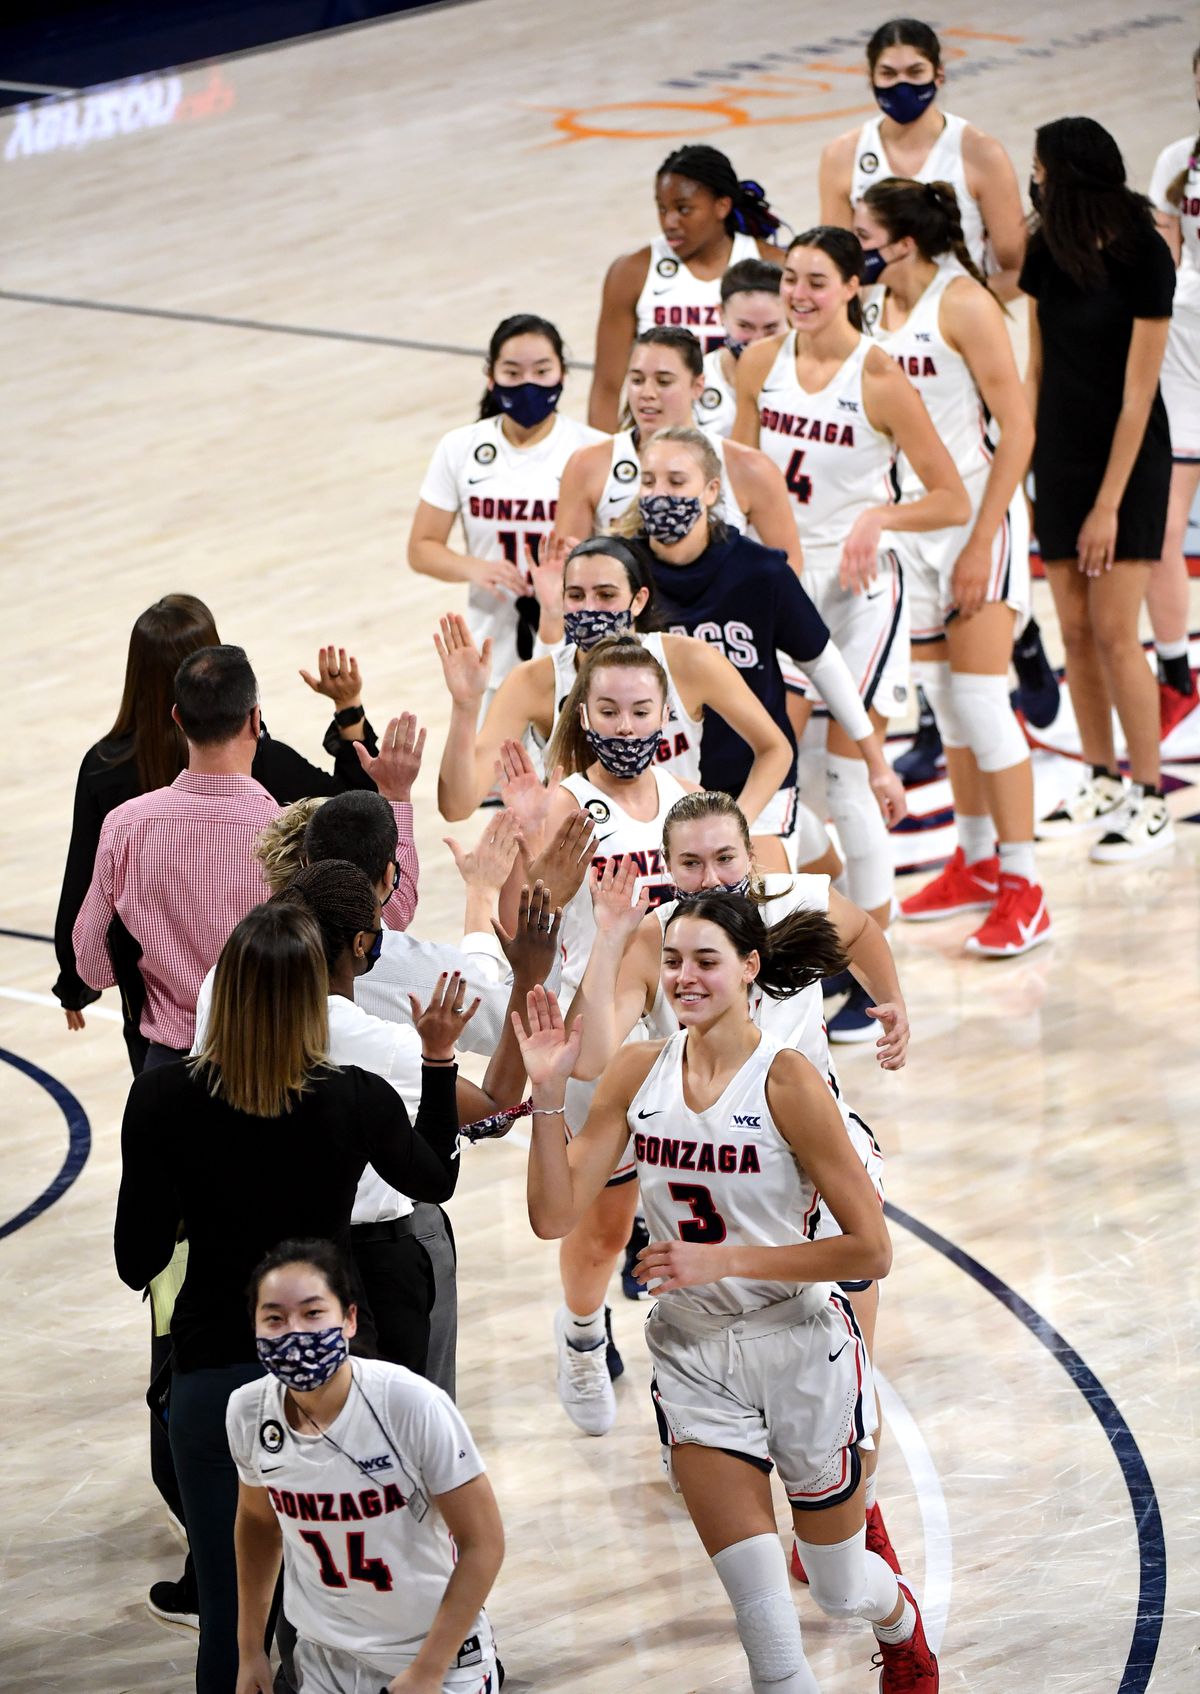 Gonzaga's Jenn Wirth named WCC's co-Player of the Year 